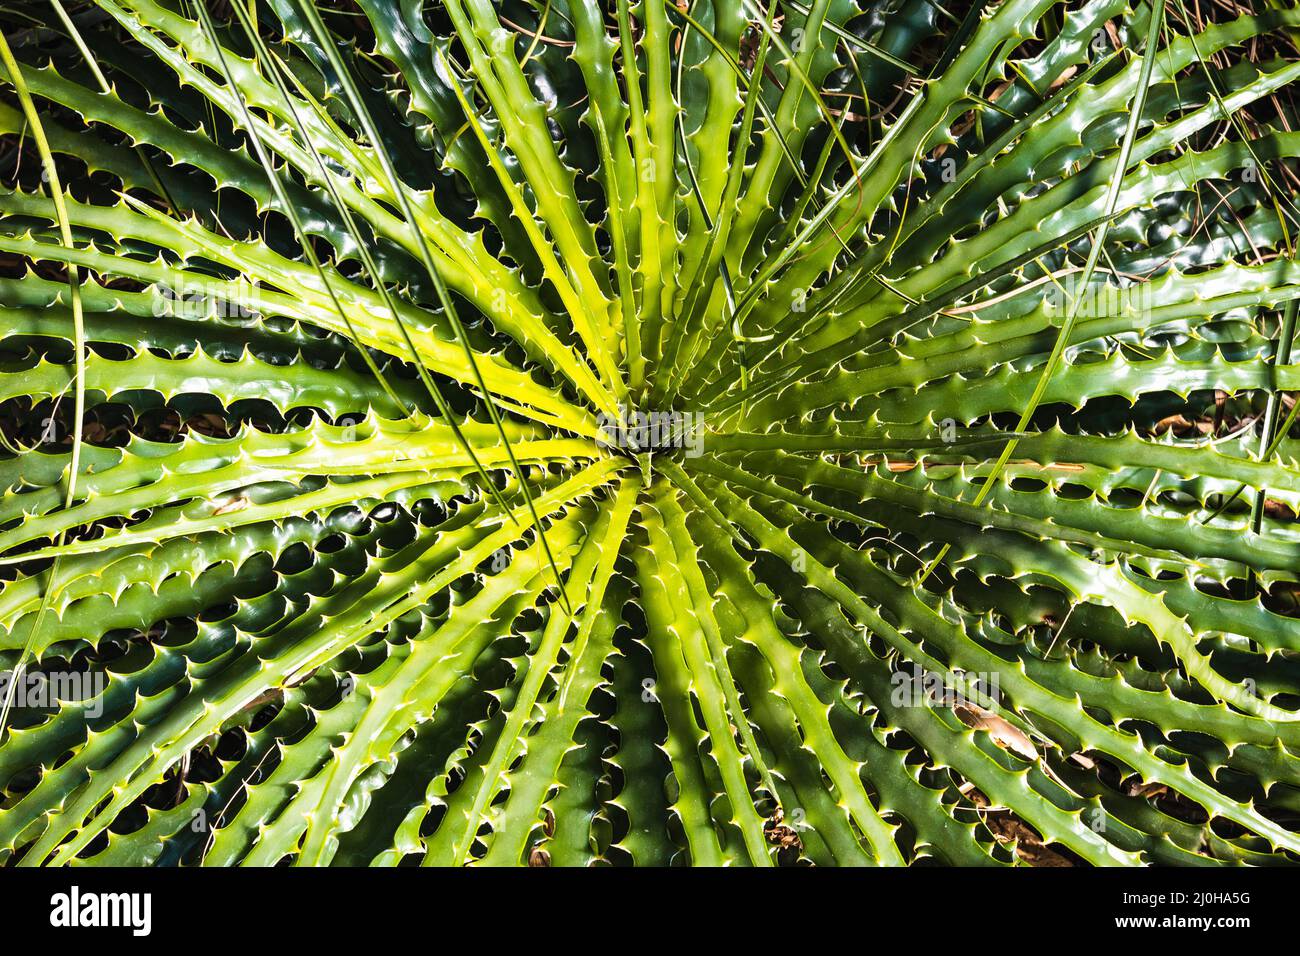 Plant with many leaves and spikes Stock Photo